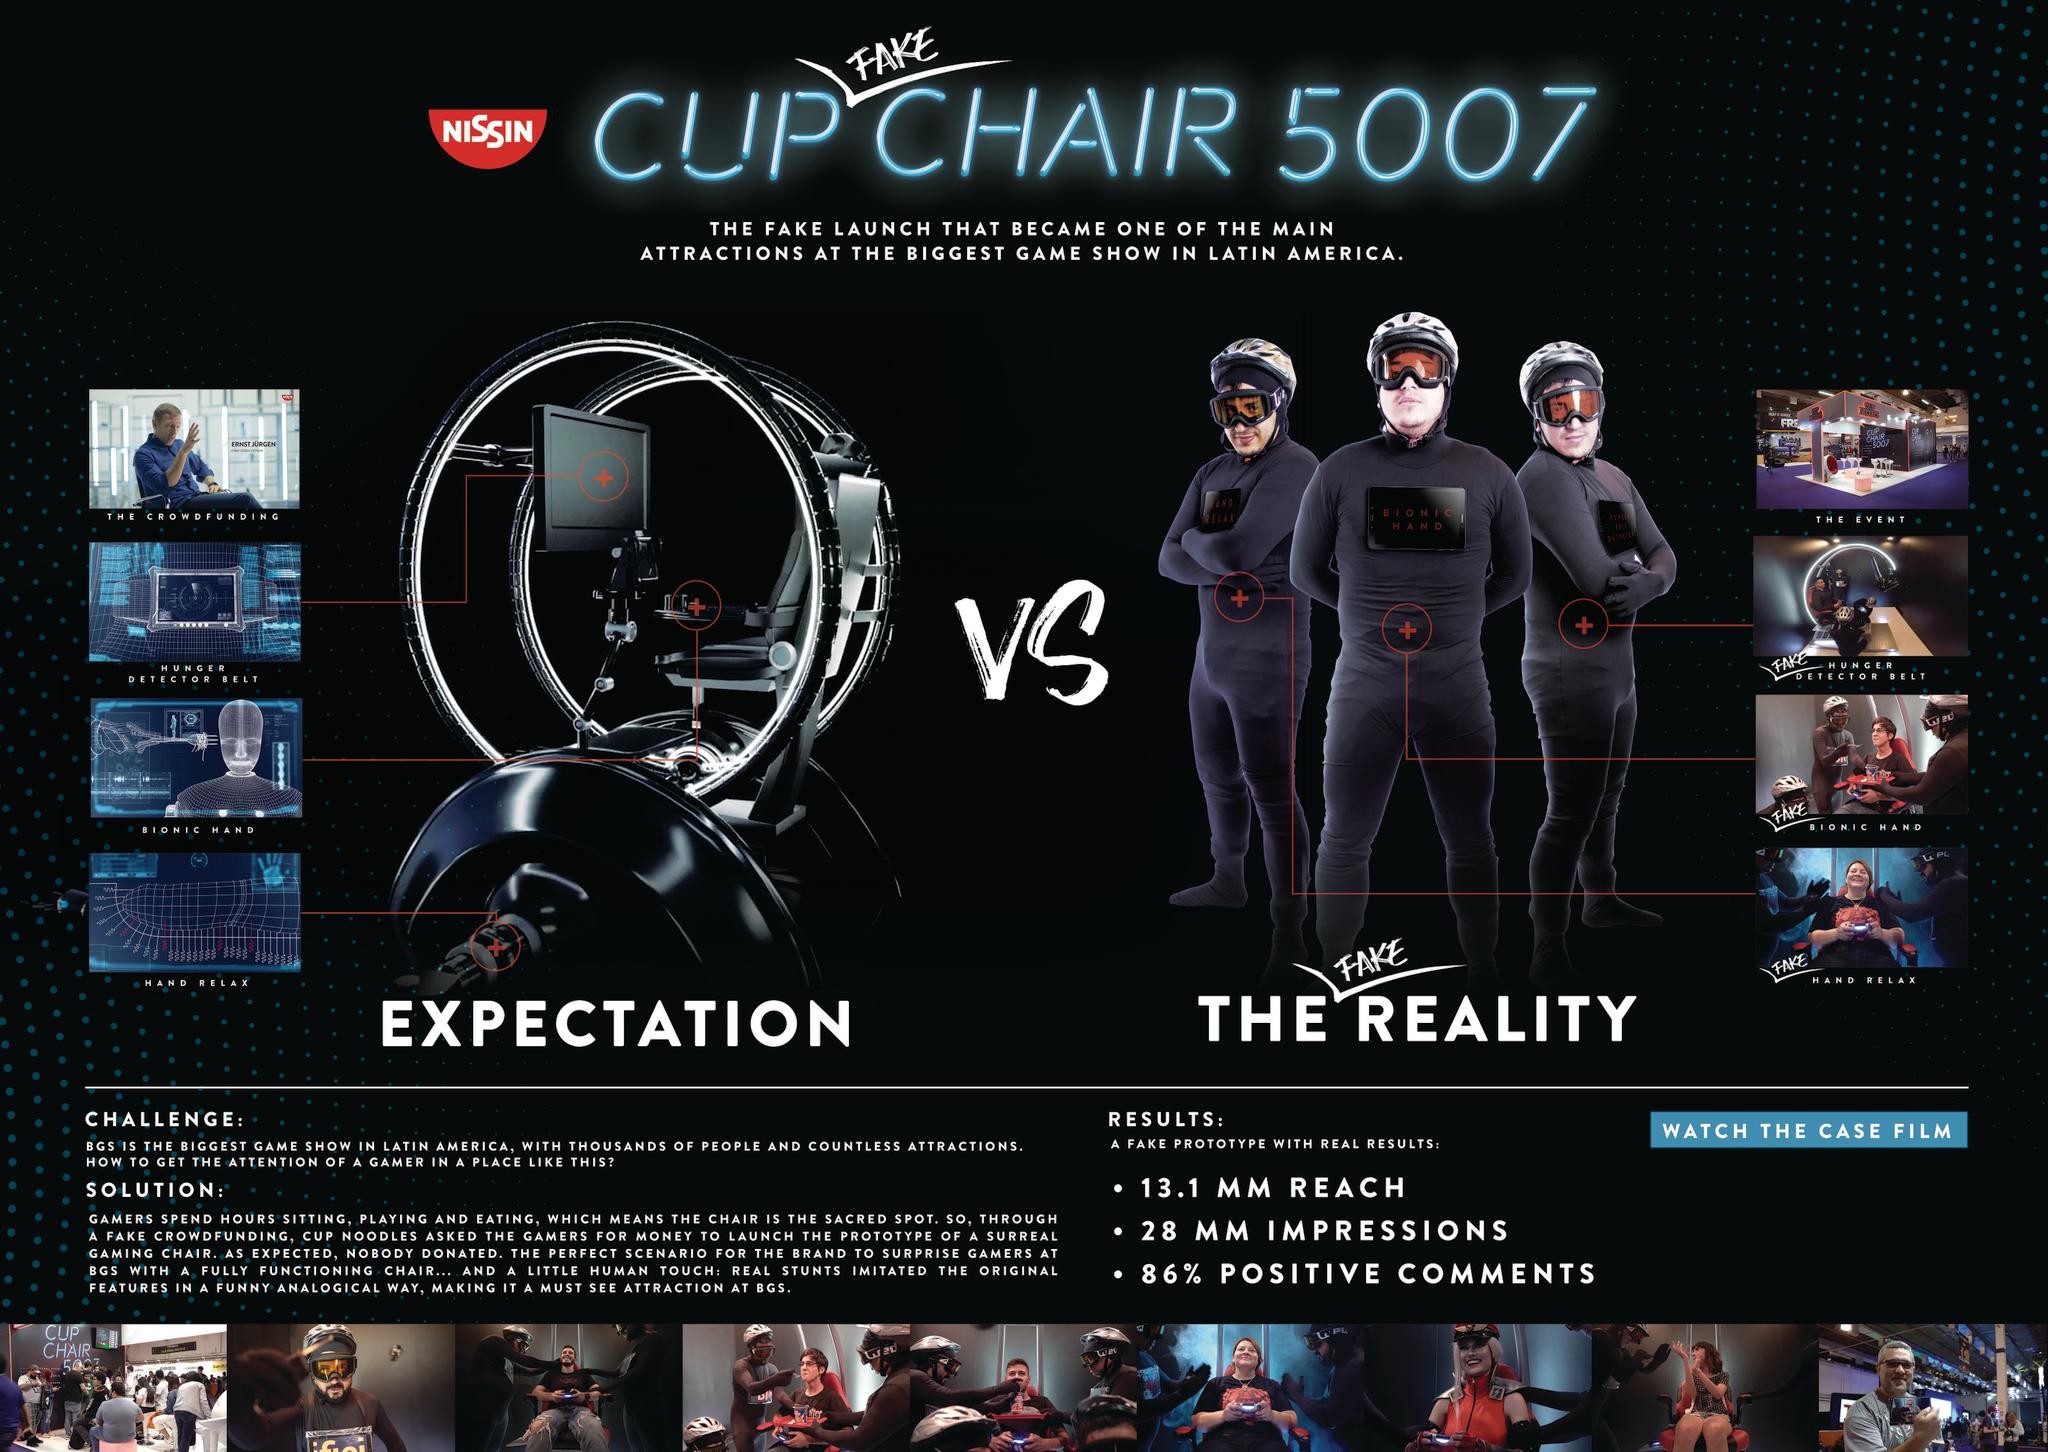 CUP CHAIR 5007